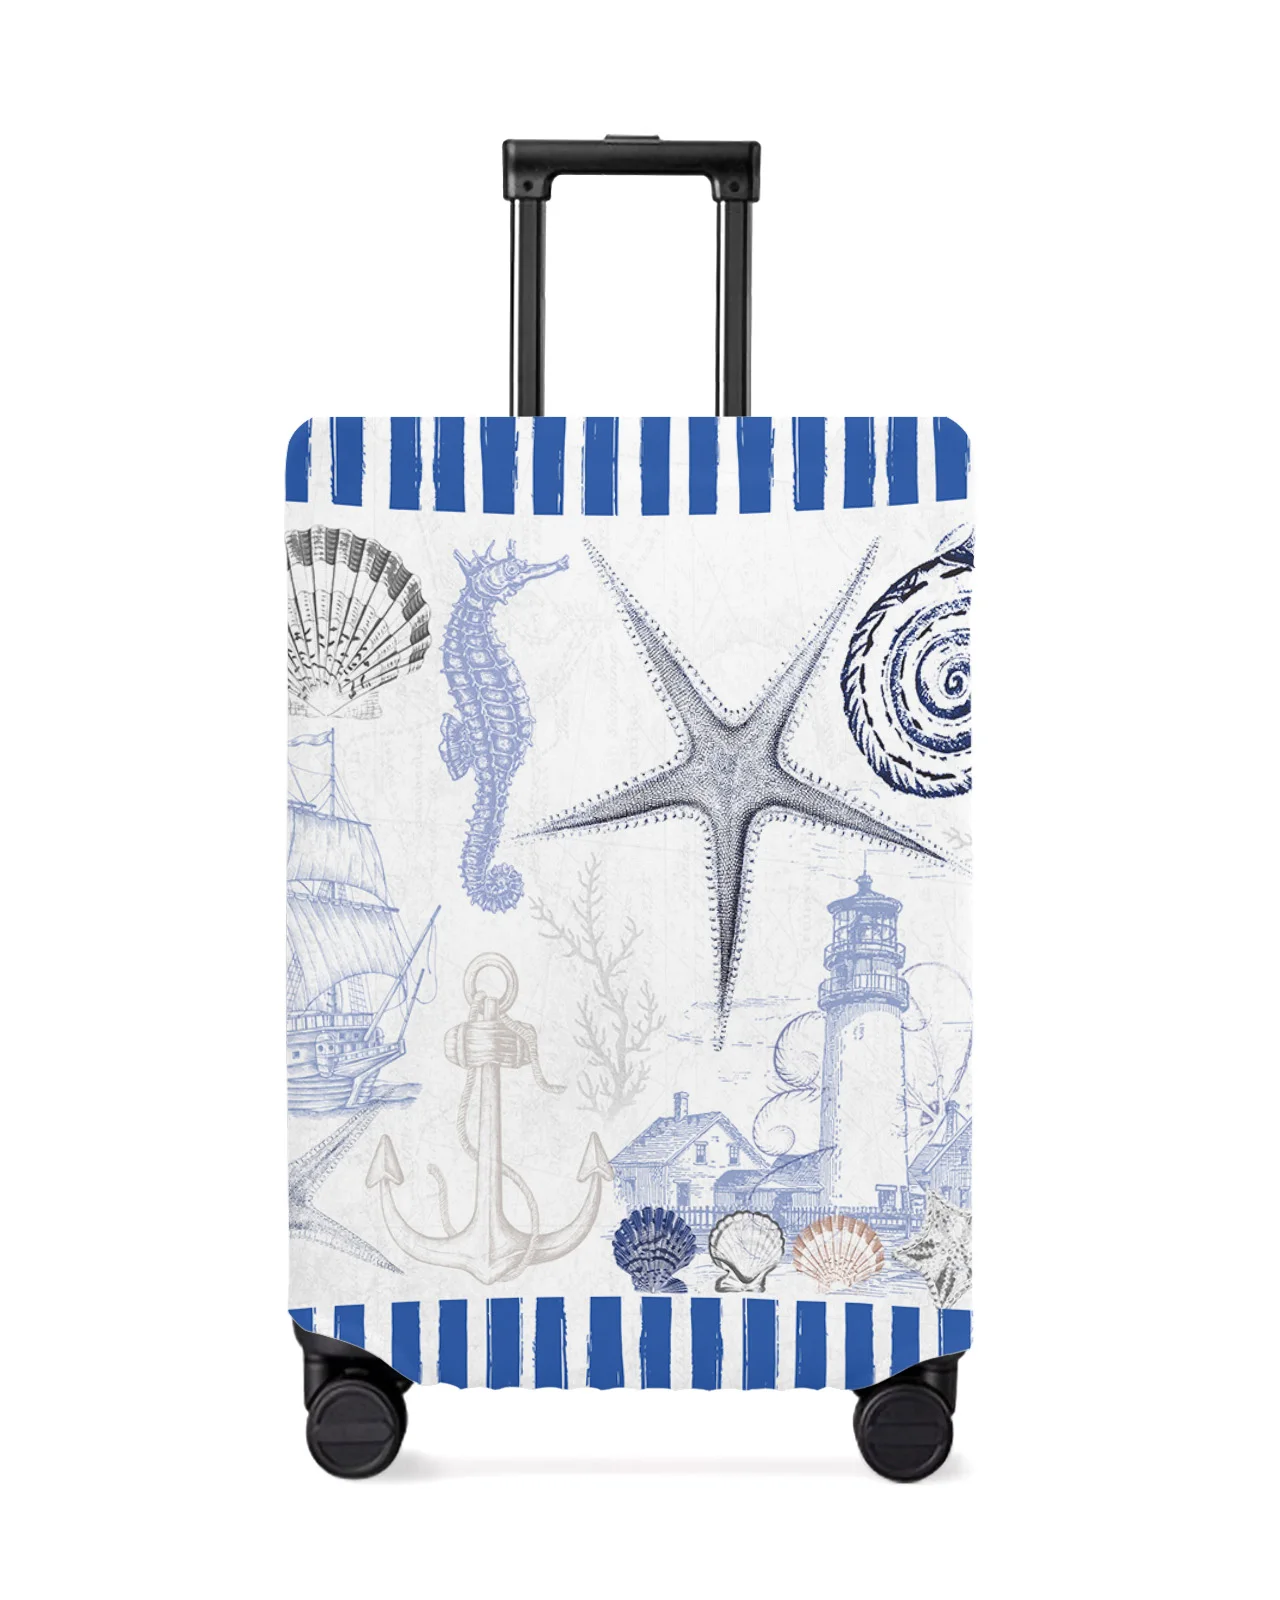 

Marine Stripes Ocean Shells Starfish Lighthouse Anchor Luggage Cover Elastic Baggage Cover Suitcase Case Travel Accessories